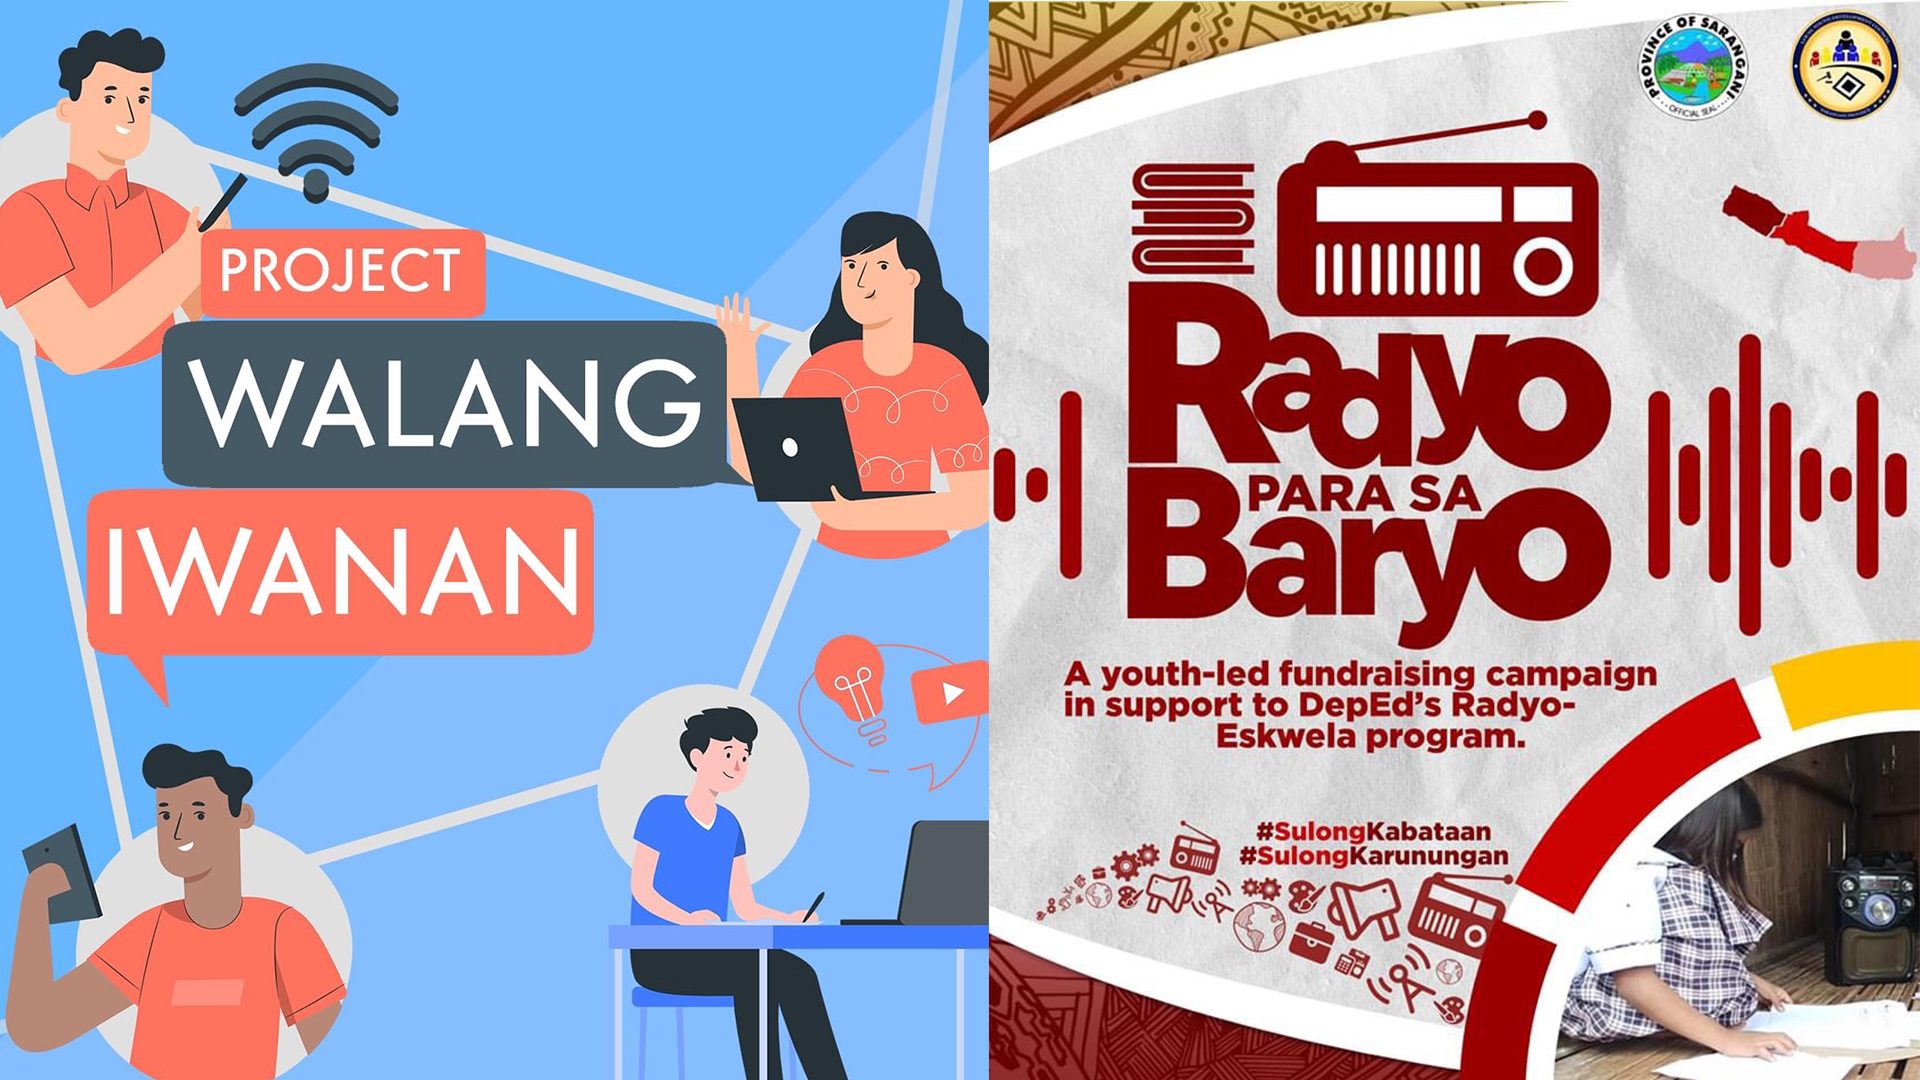 From Cagayan to Sarangani, students help each other via internet and radio initiatives